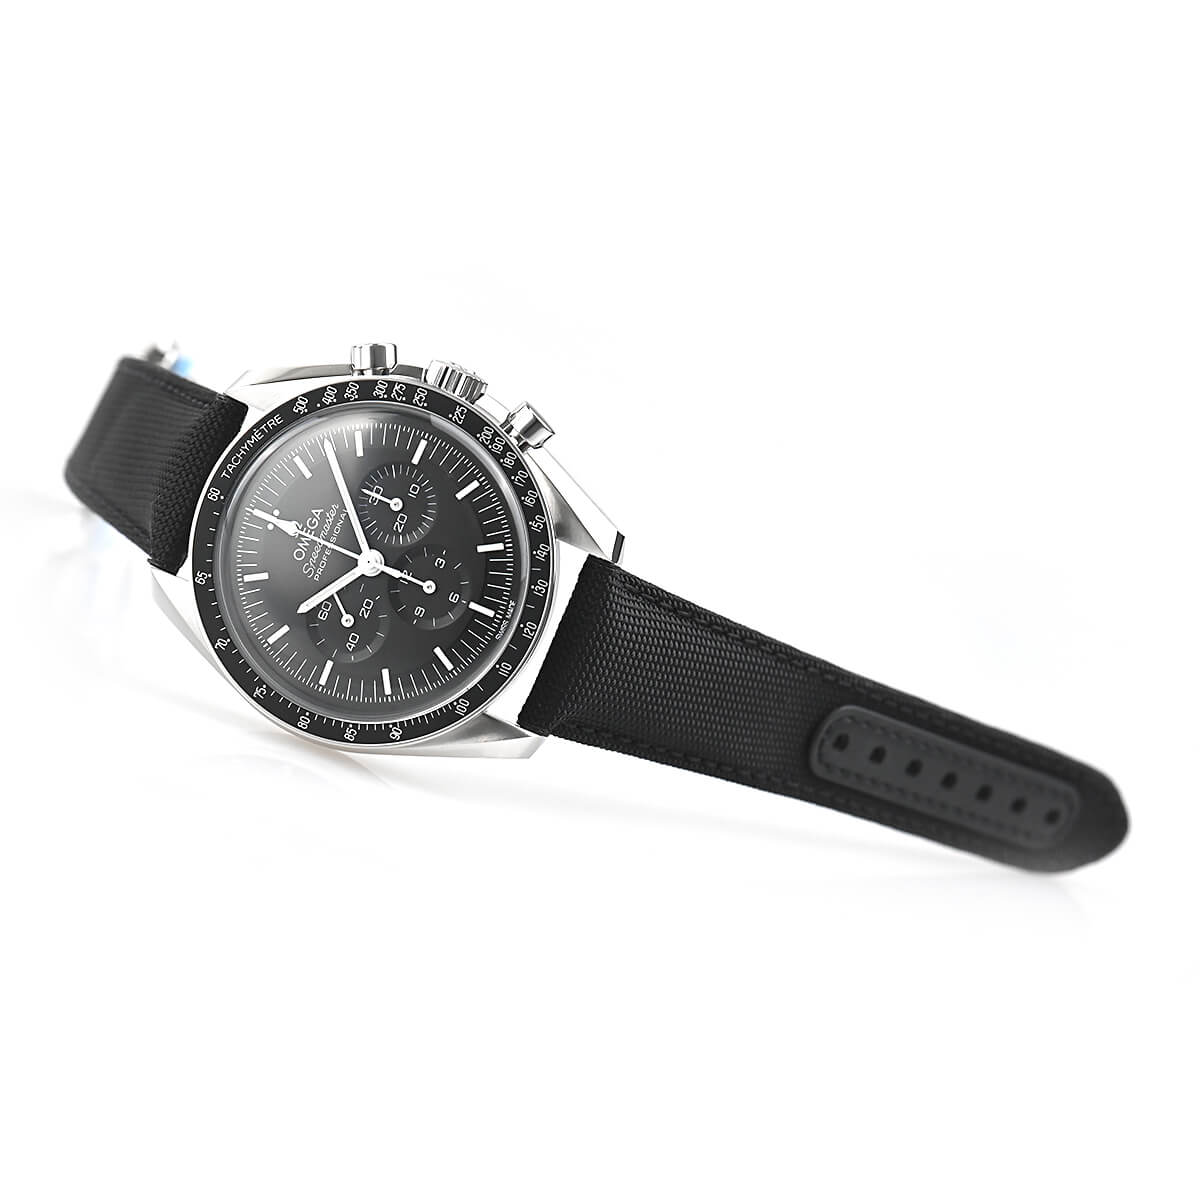 Omega Speedmaster Moonwatch Co-Axial Master Chronometer 310.32.42.50.01.001